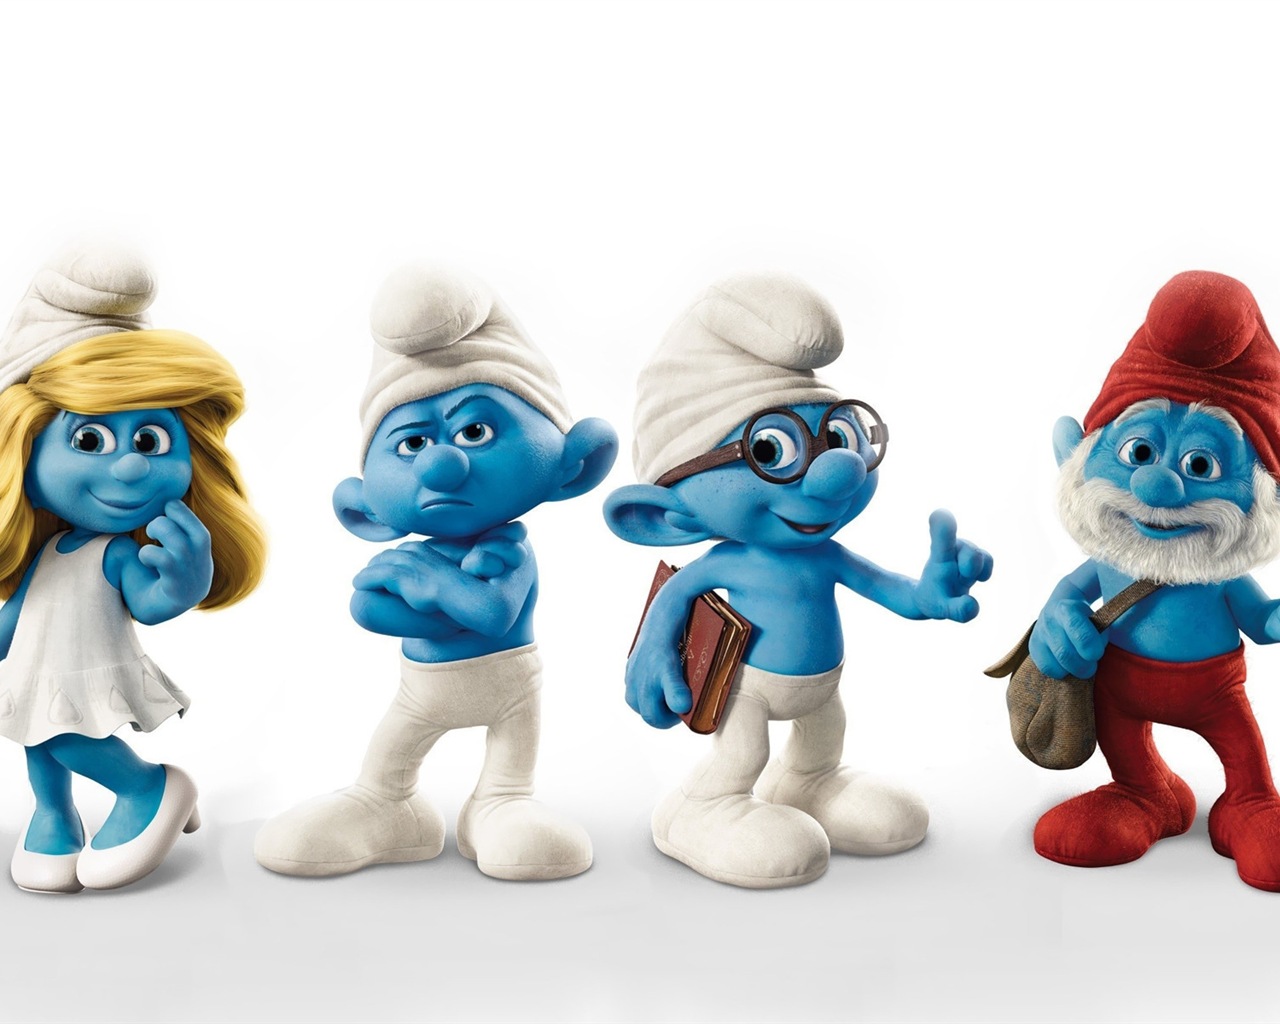 The Smurfs 2 HD movie wallpapers #3 - 1280x1024